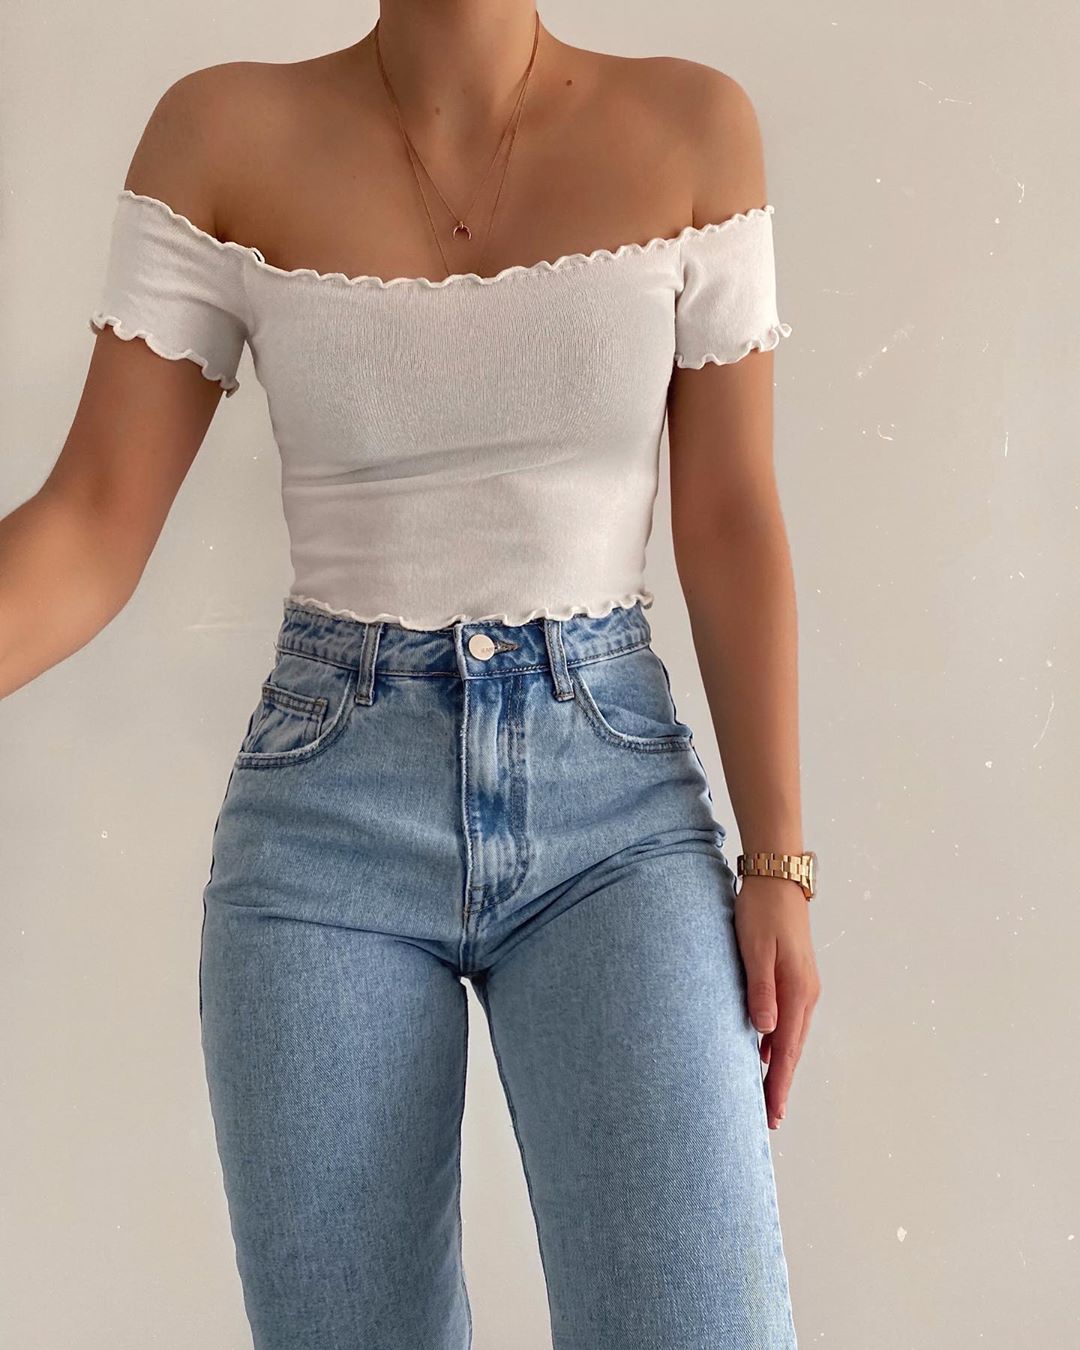 15 Under-$100 Off-the-Shoulder Tops to Wear Now